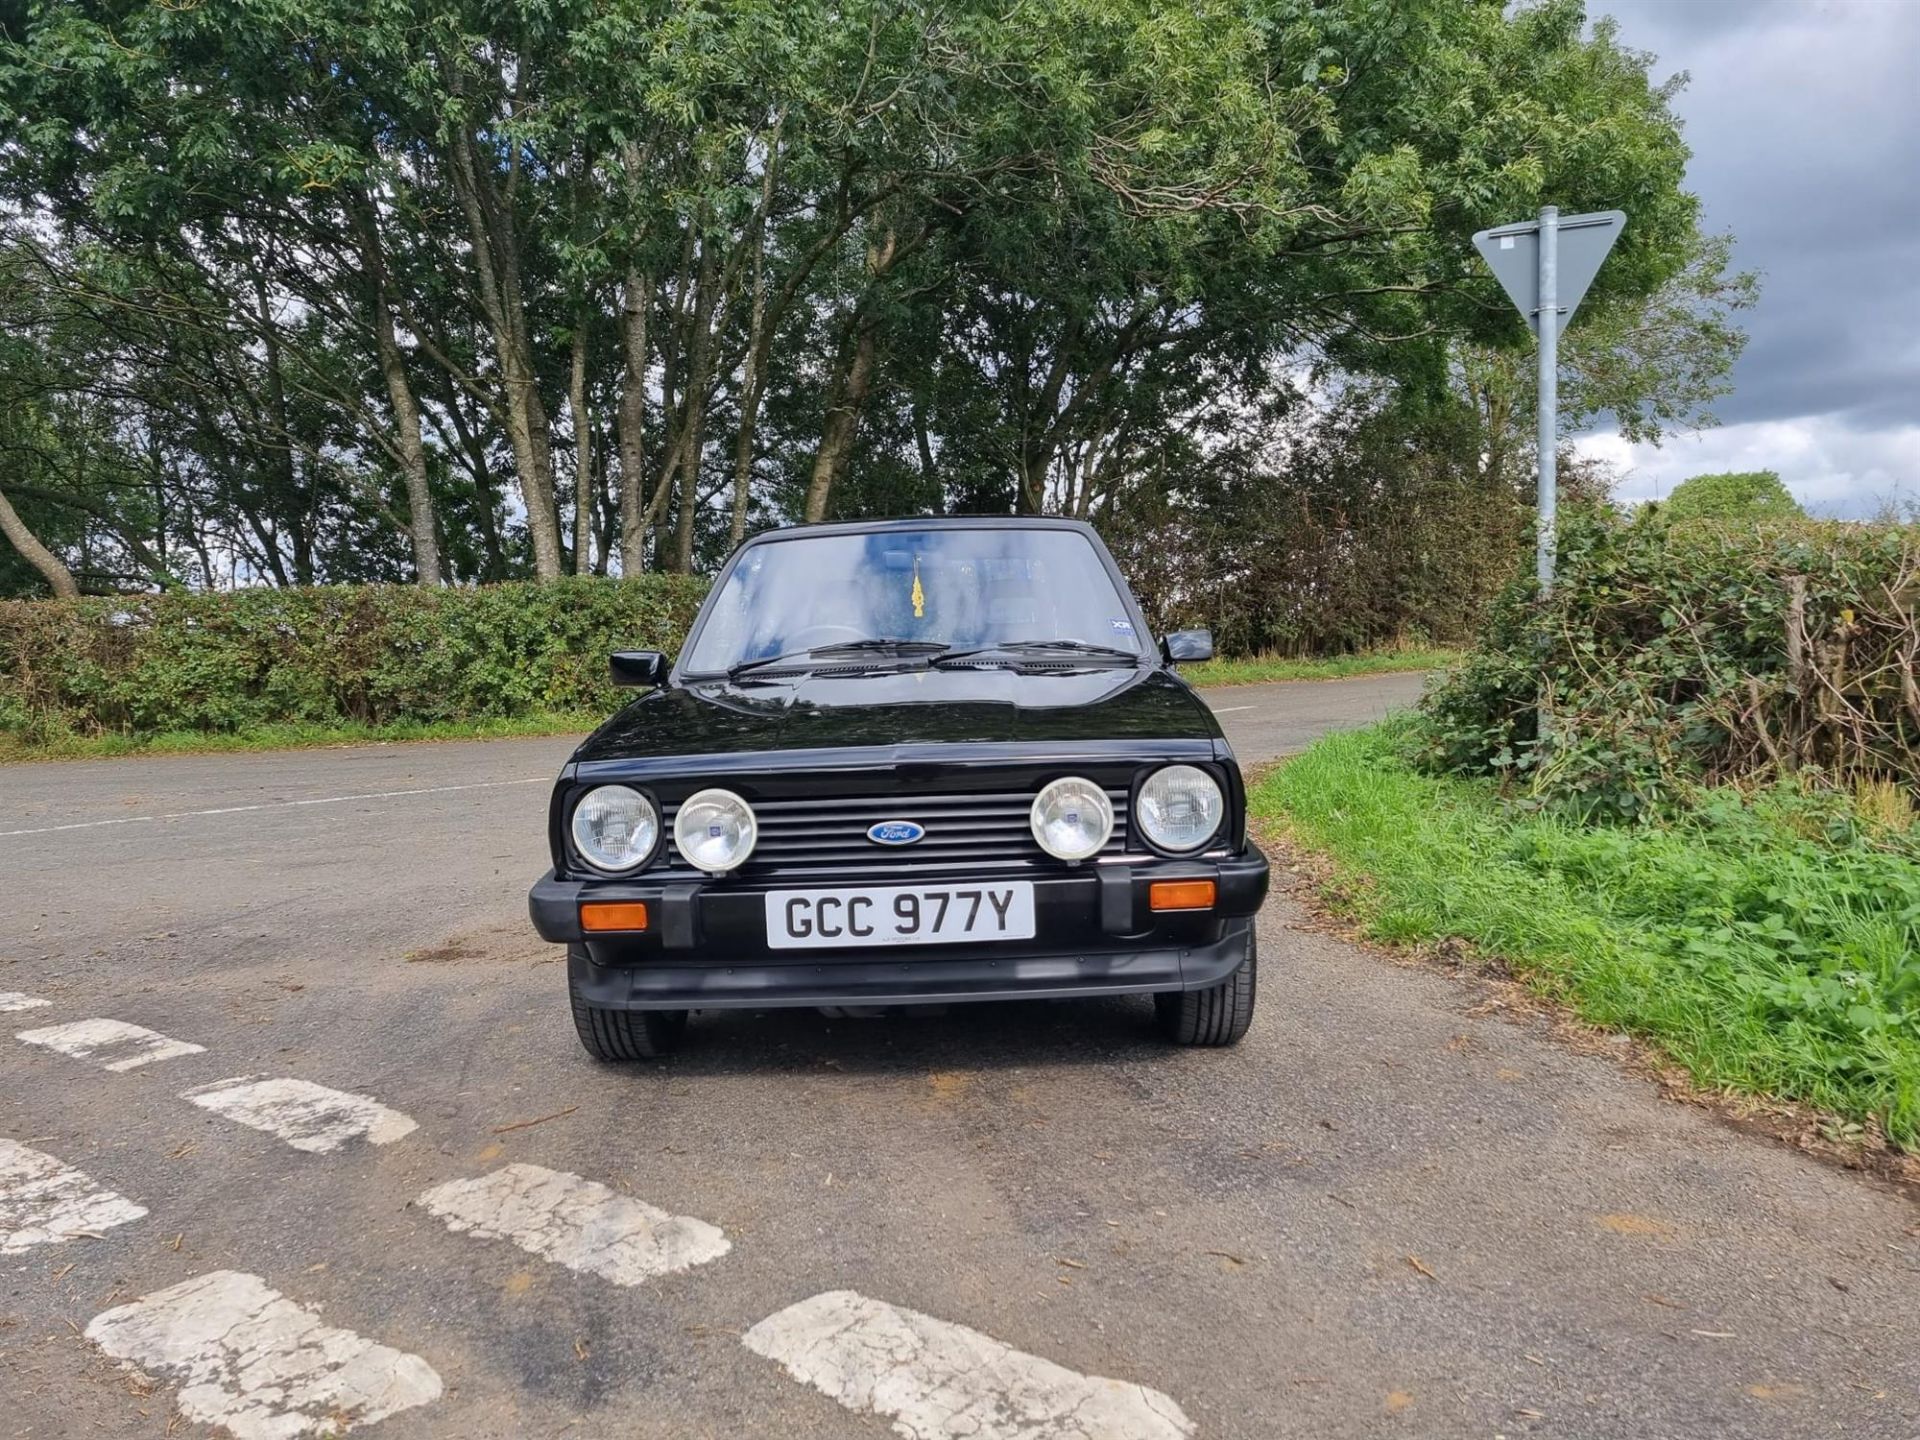 1982 Ford XR2 Mk1 - Image 9 of 10